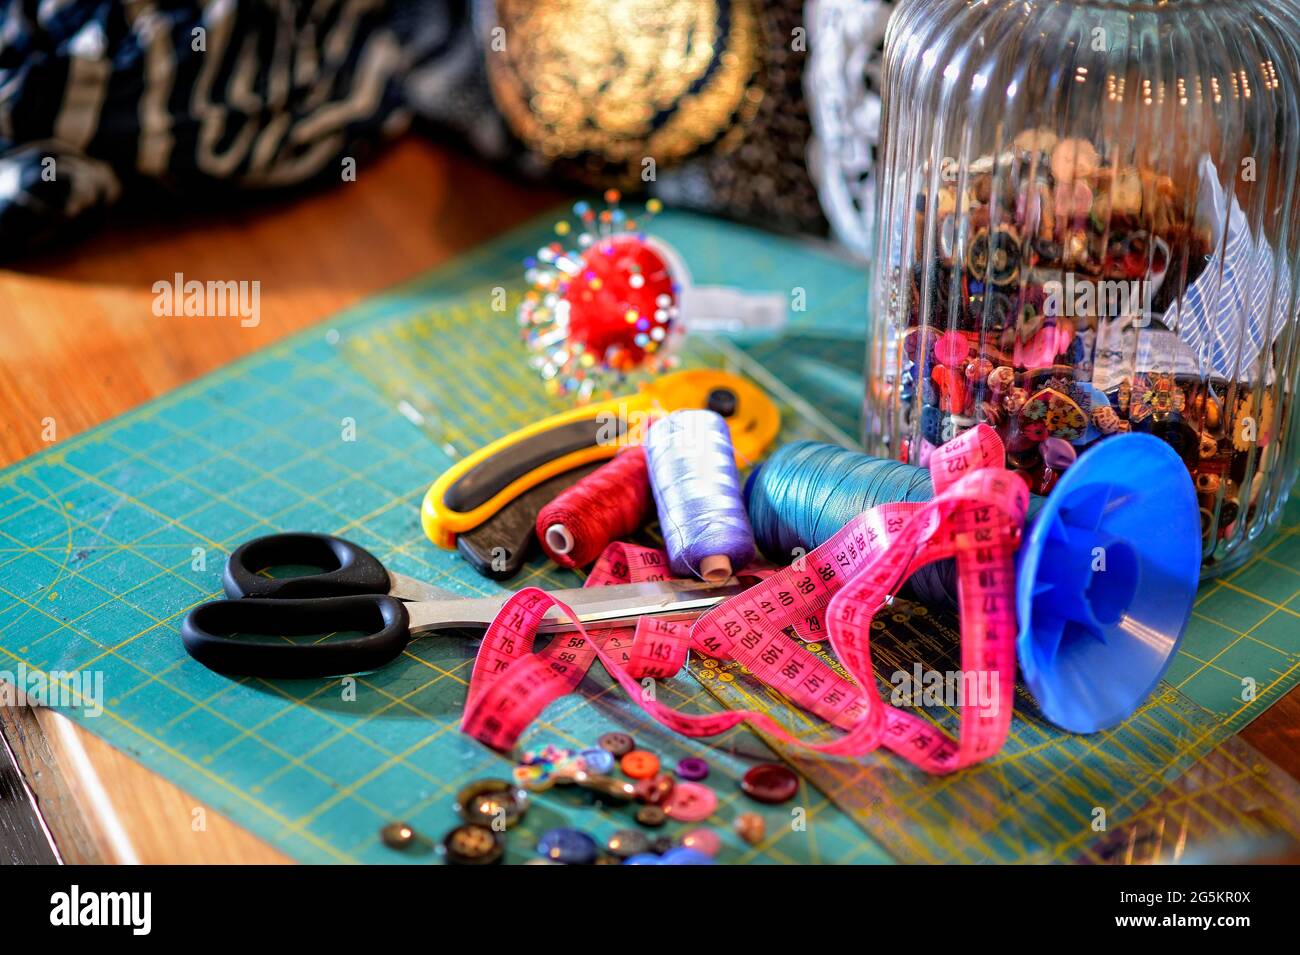 Tailor's workshop, thread, scissors, buttons, tape measure, Germany, Europe Stock Photo